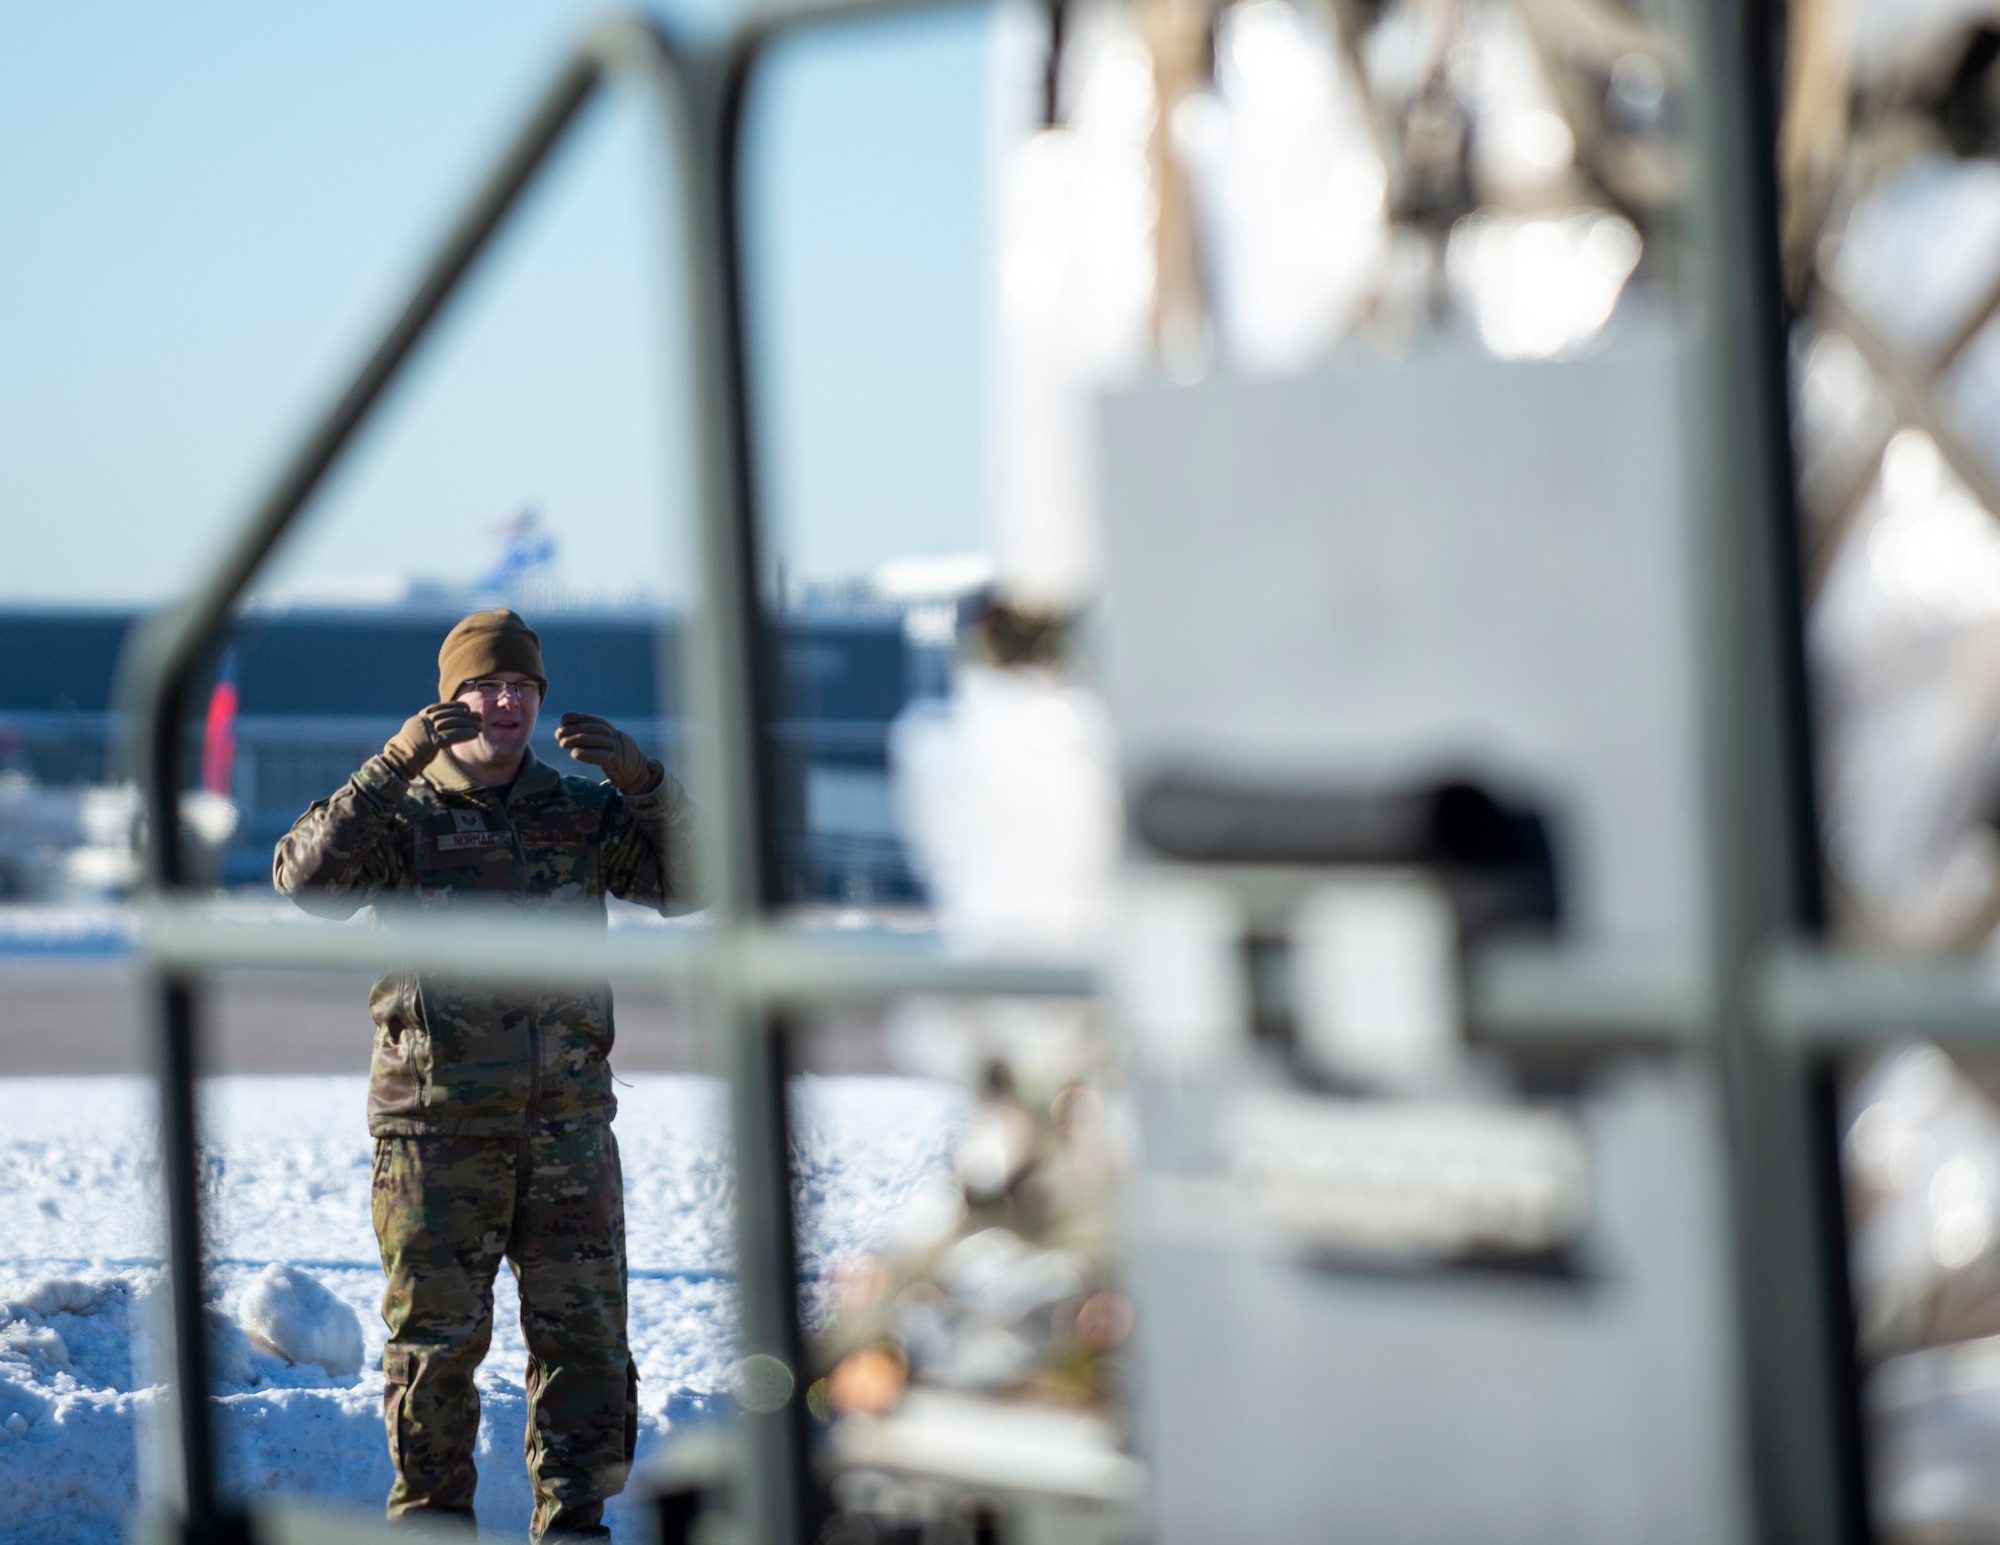 U.S. Air Force Tech. Sgt. Trevor Norman, 133rd Air Transportation Function, provides directions to a K-loader operator in St. Paul, Minn., Jan. 20, 2022.